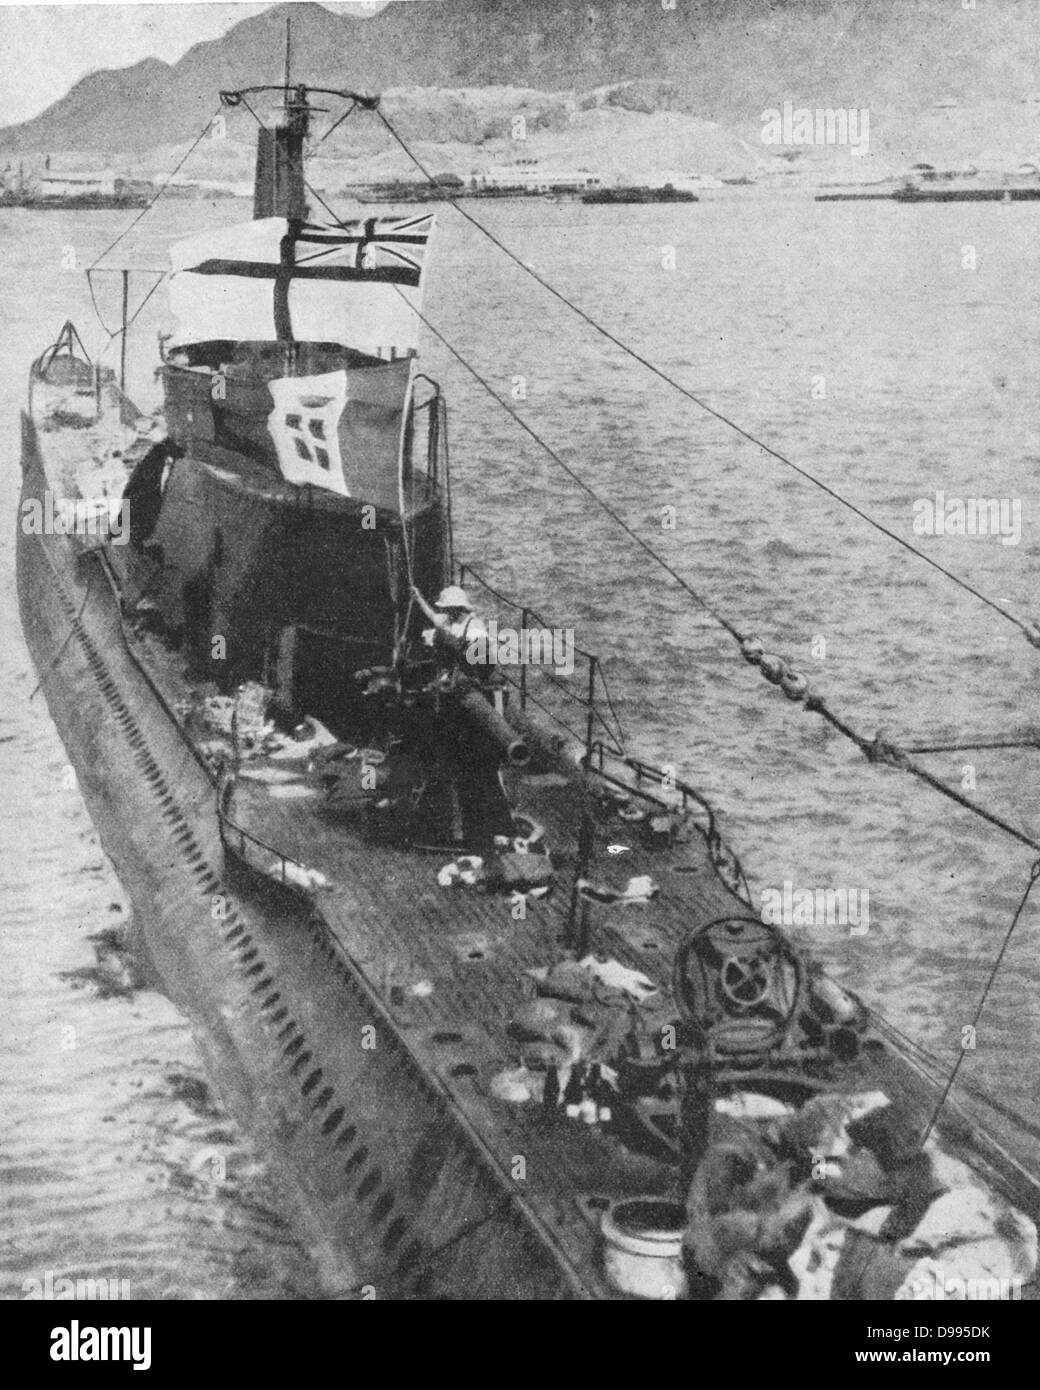 Italian submarine 'Galileo Galilei' flying the White Ensign after capture off Aden by the British Admiralty trawler 'Moonstone' on 19 June 1940. Depth charges forced submarine to the surface and crew was forced to surrender. Stock Photo